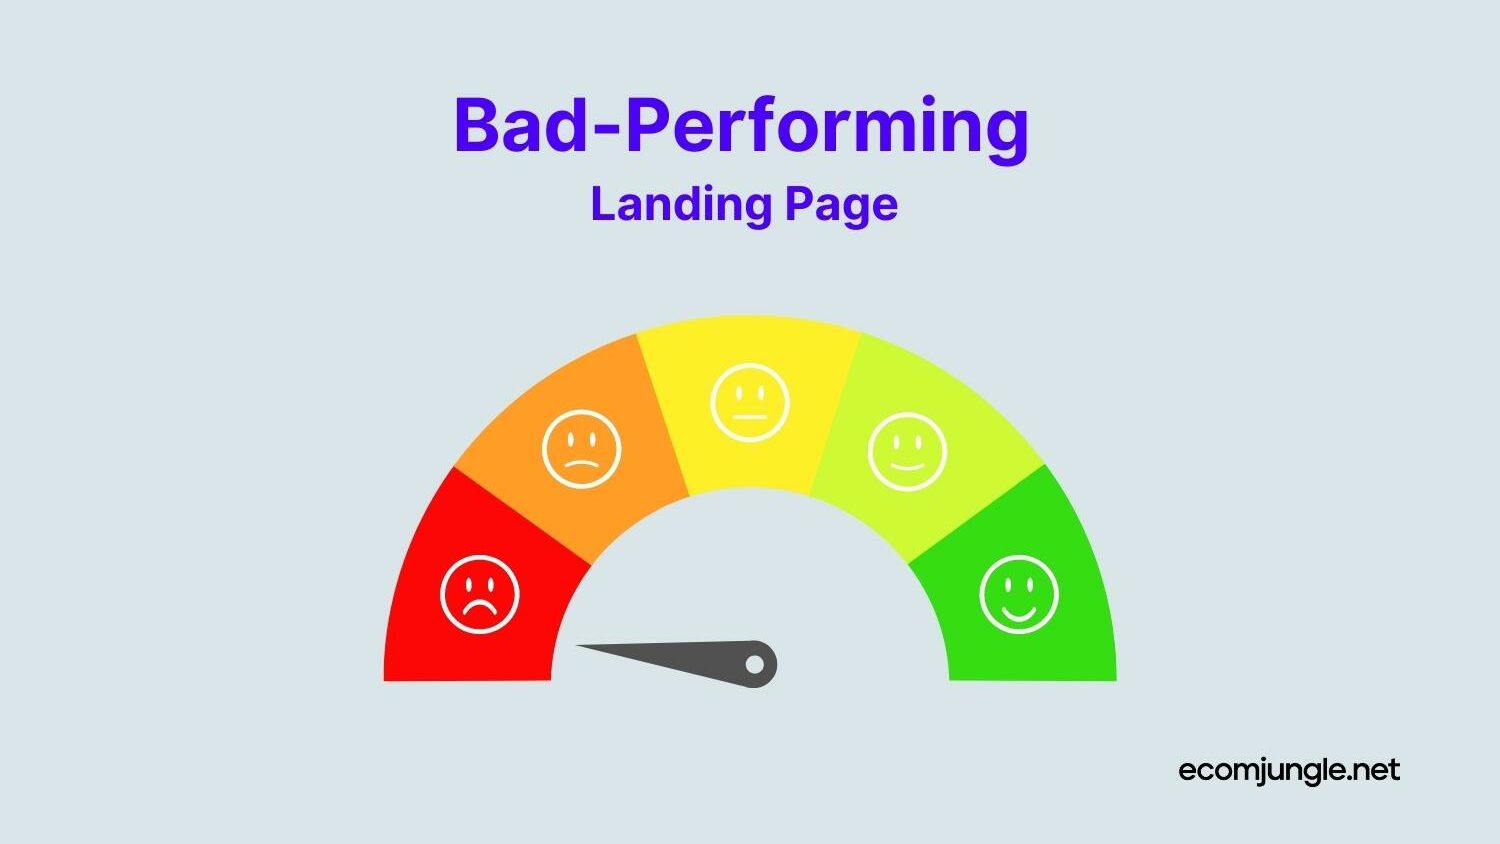 With right keywords you can improve your bad performing landing page